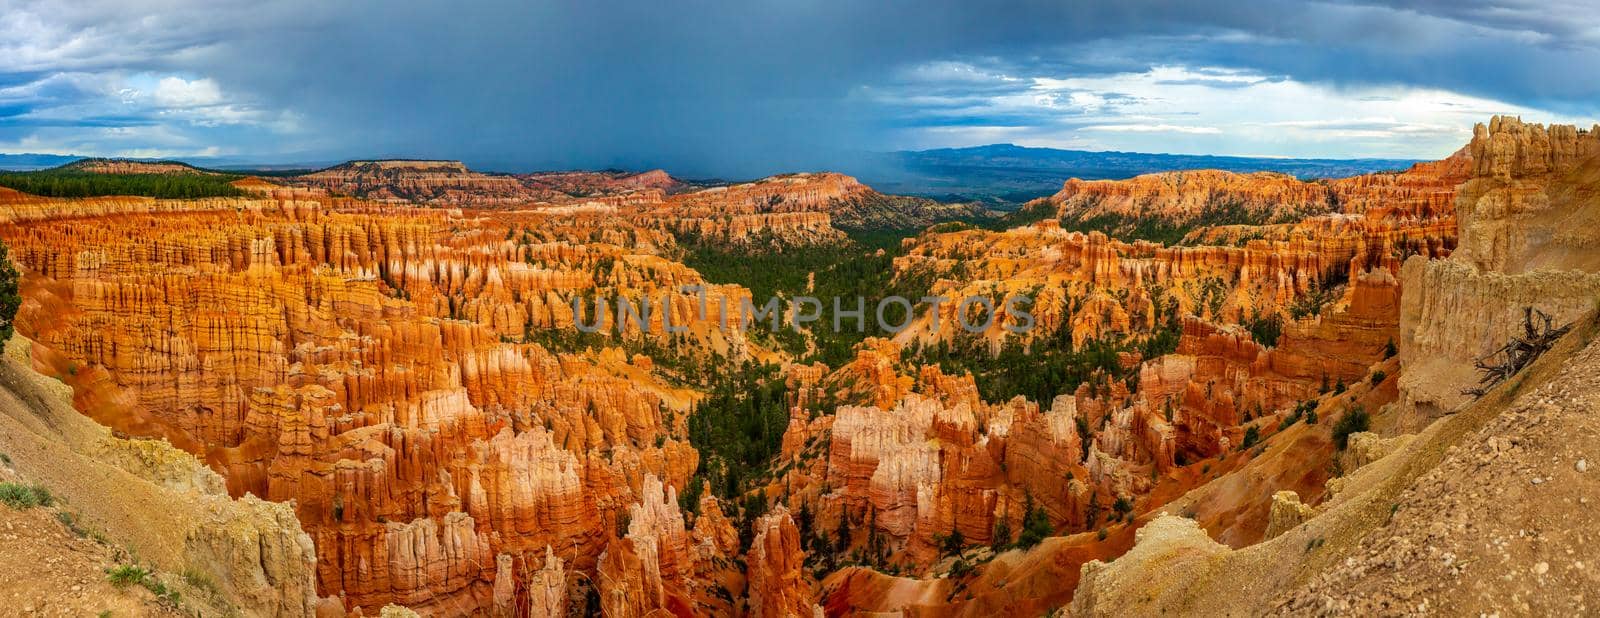 Bryce Amphitheater in Bryce Canyon National Park by gepeng